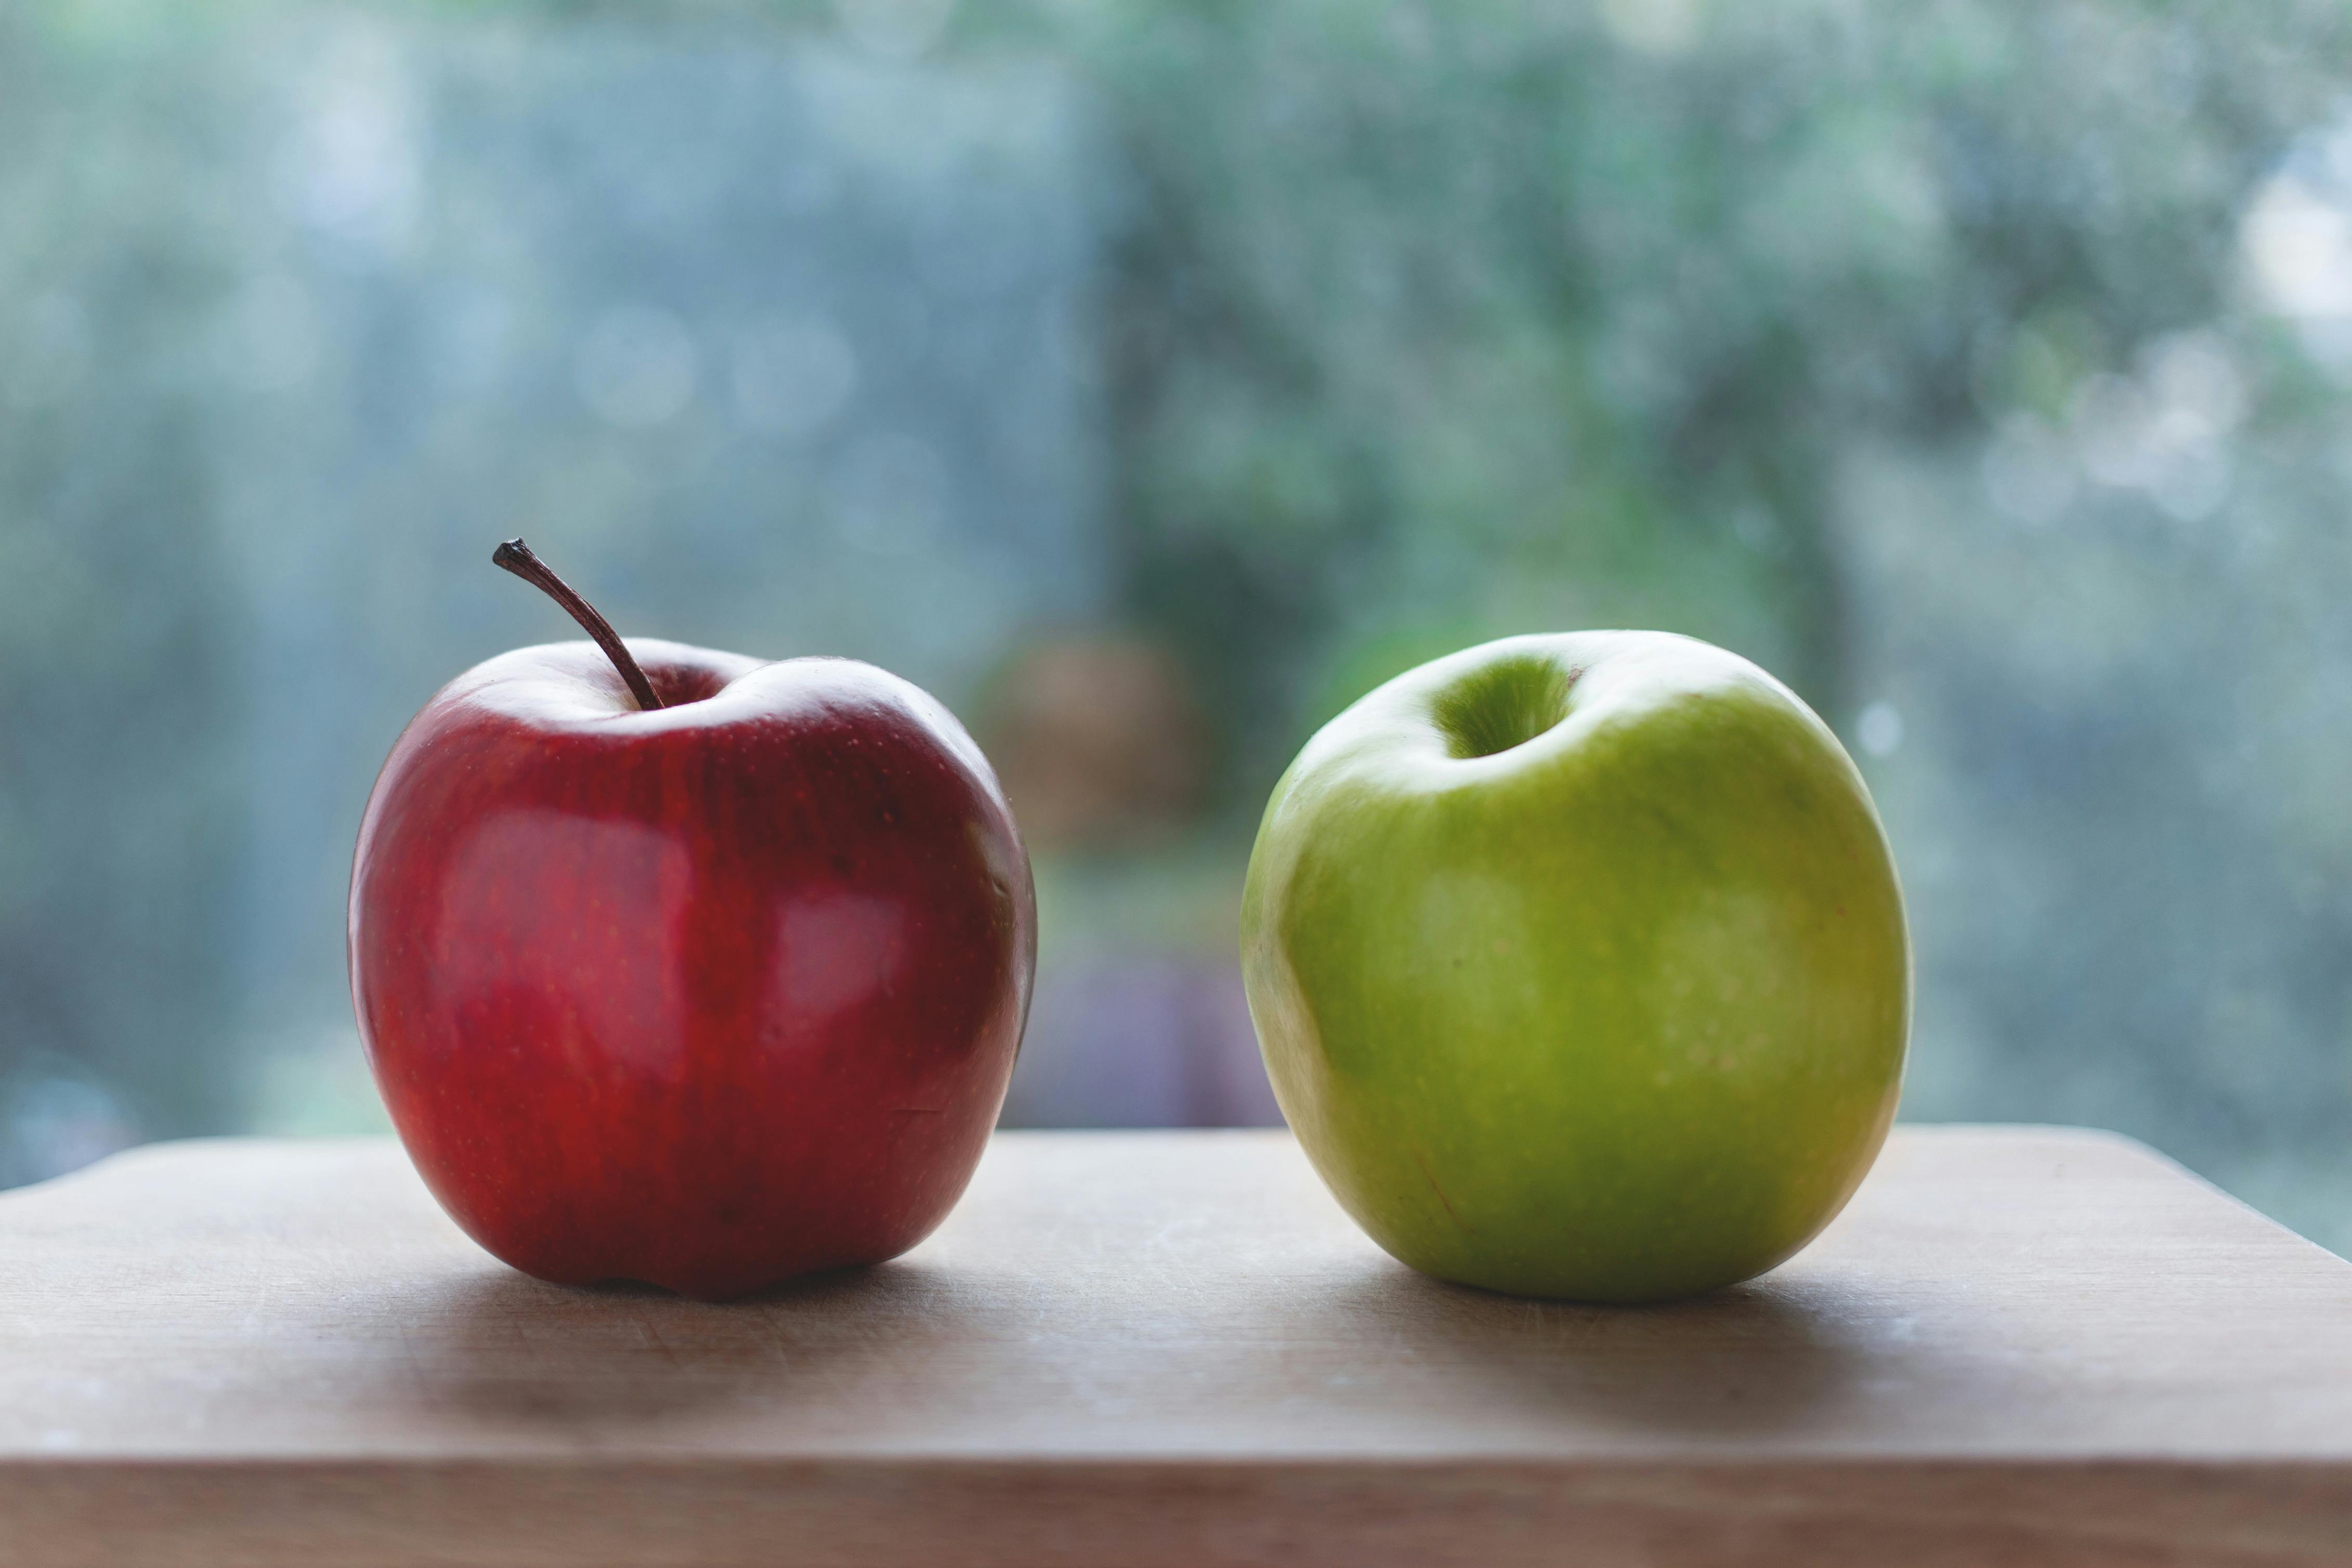 red-apple-beside-the-green-apple-free-stock-photo